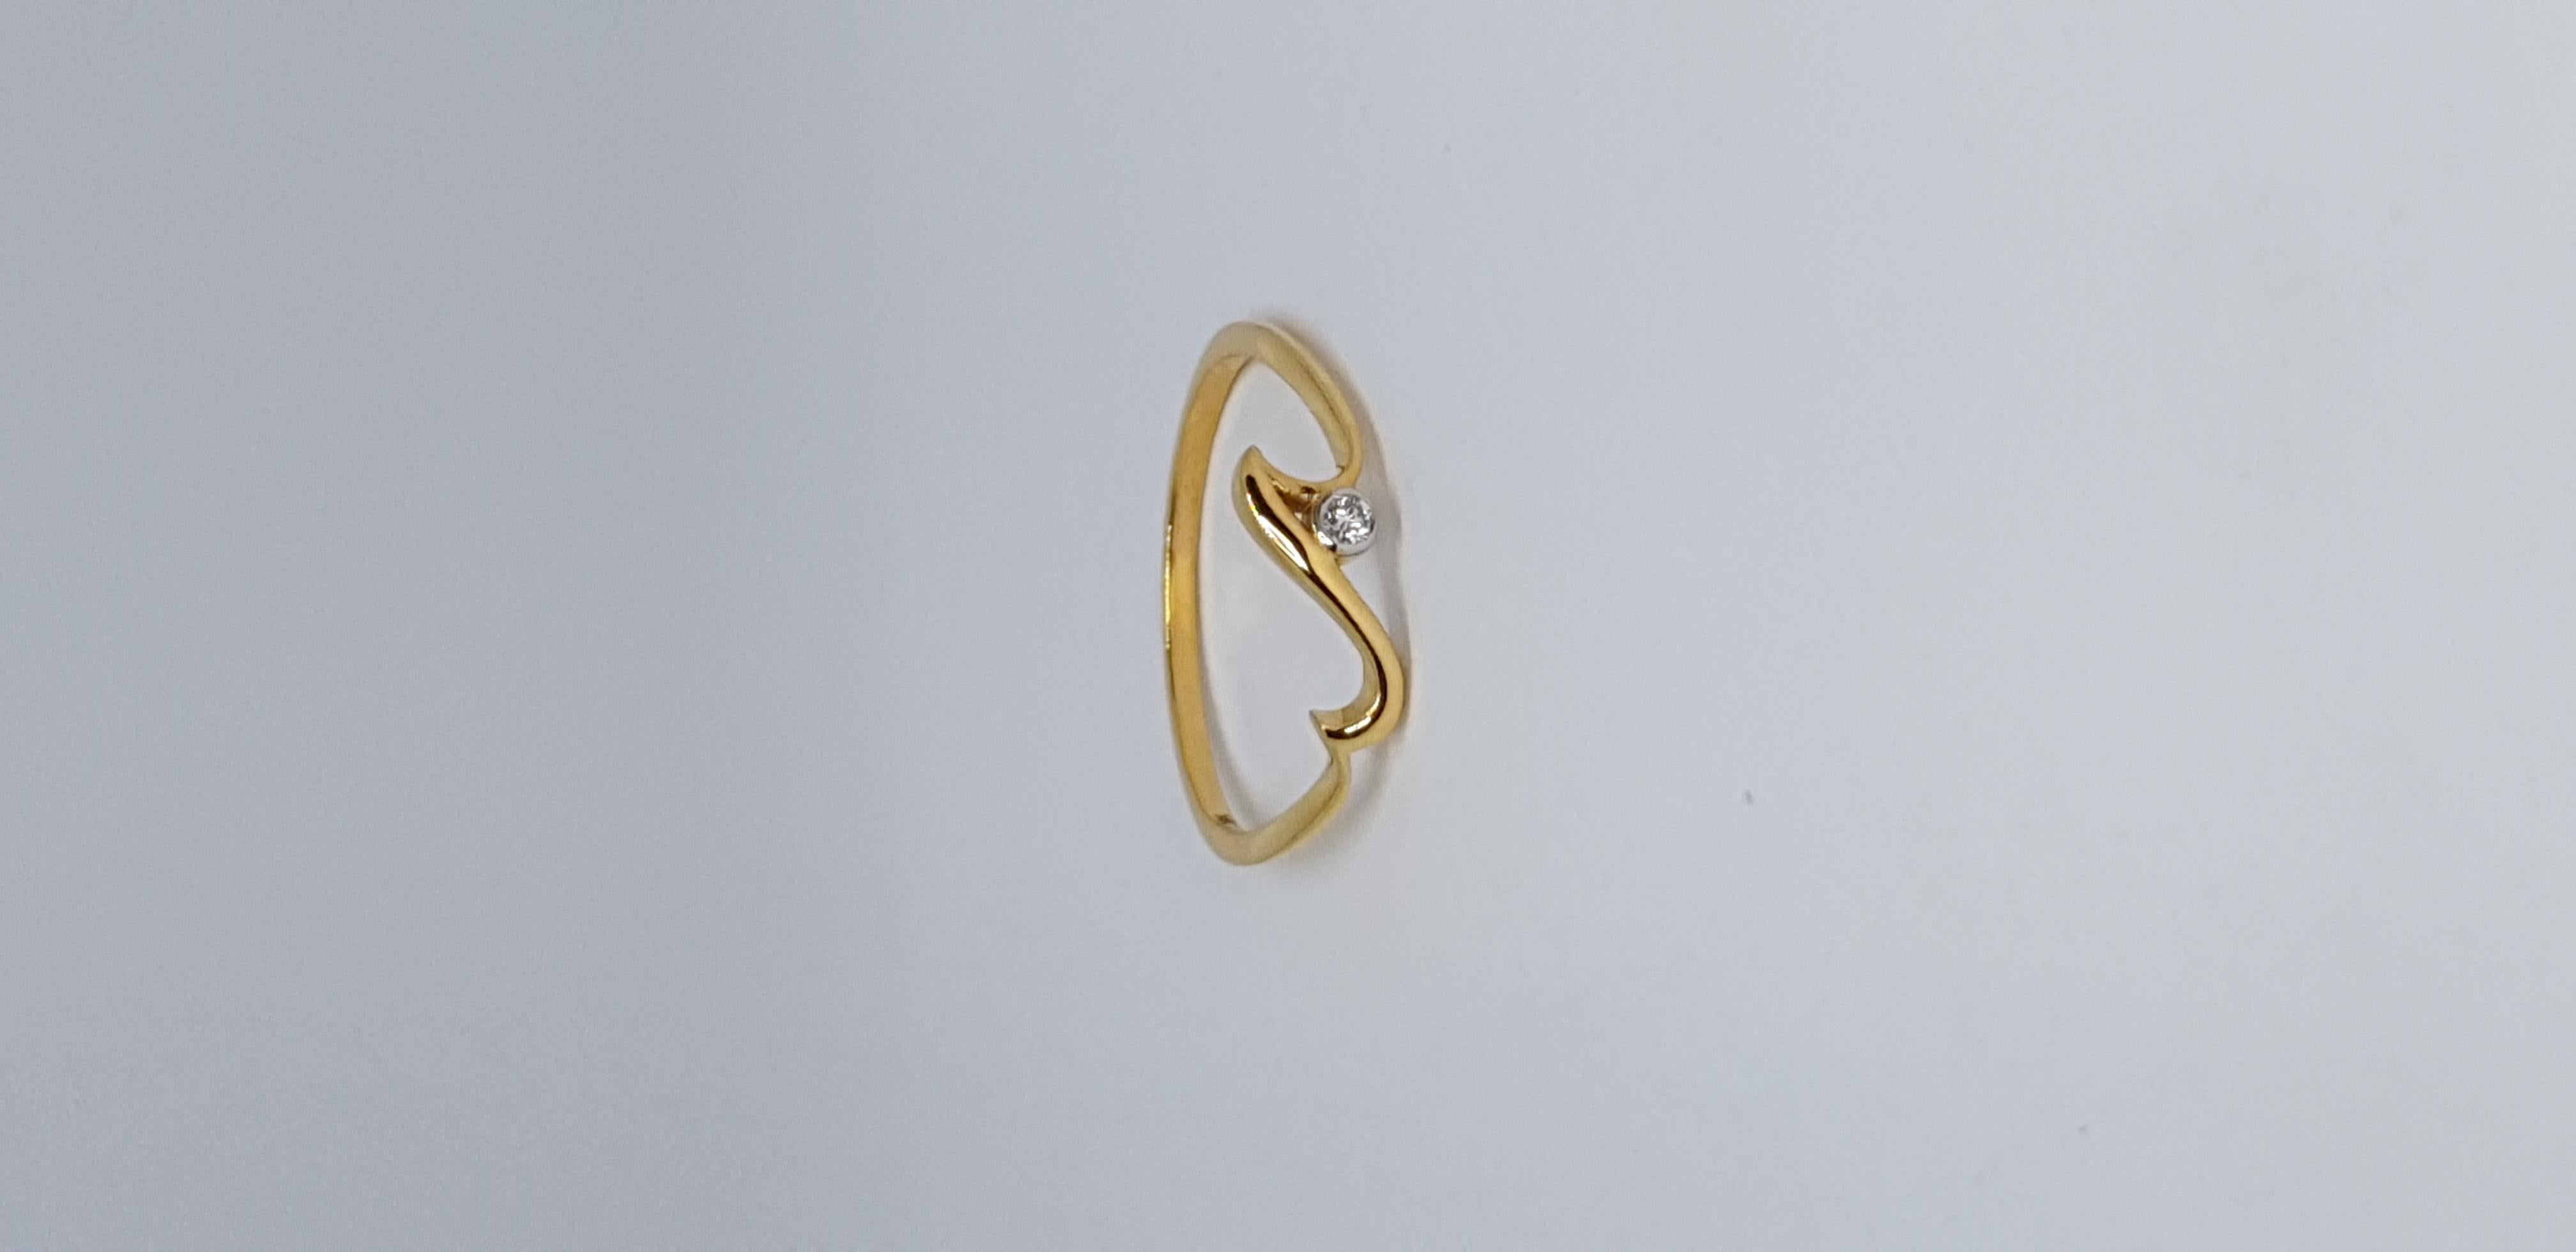 For Sale:  Natural Diamond Wave Ring 14K Solid Gold Dainty Ocean Lover Jewelry Gift. 13